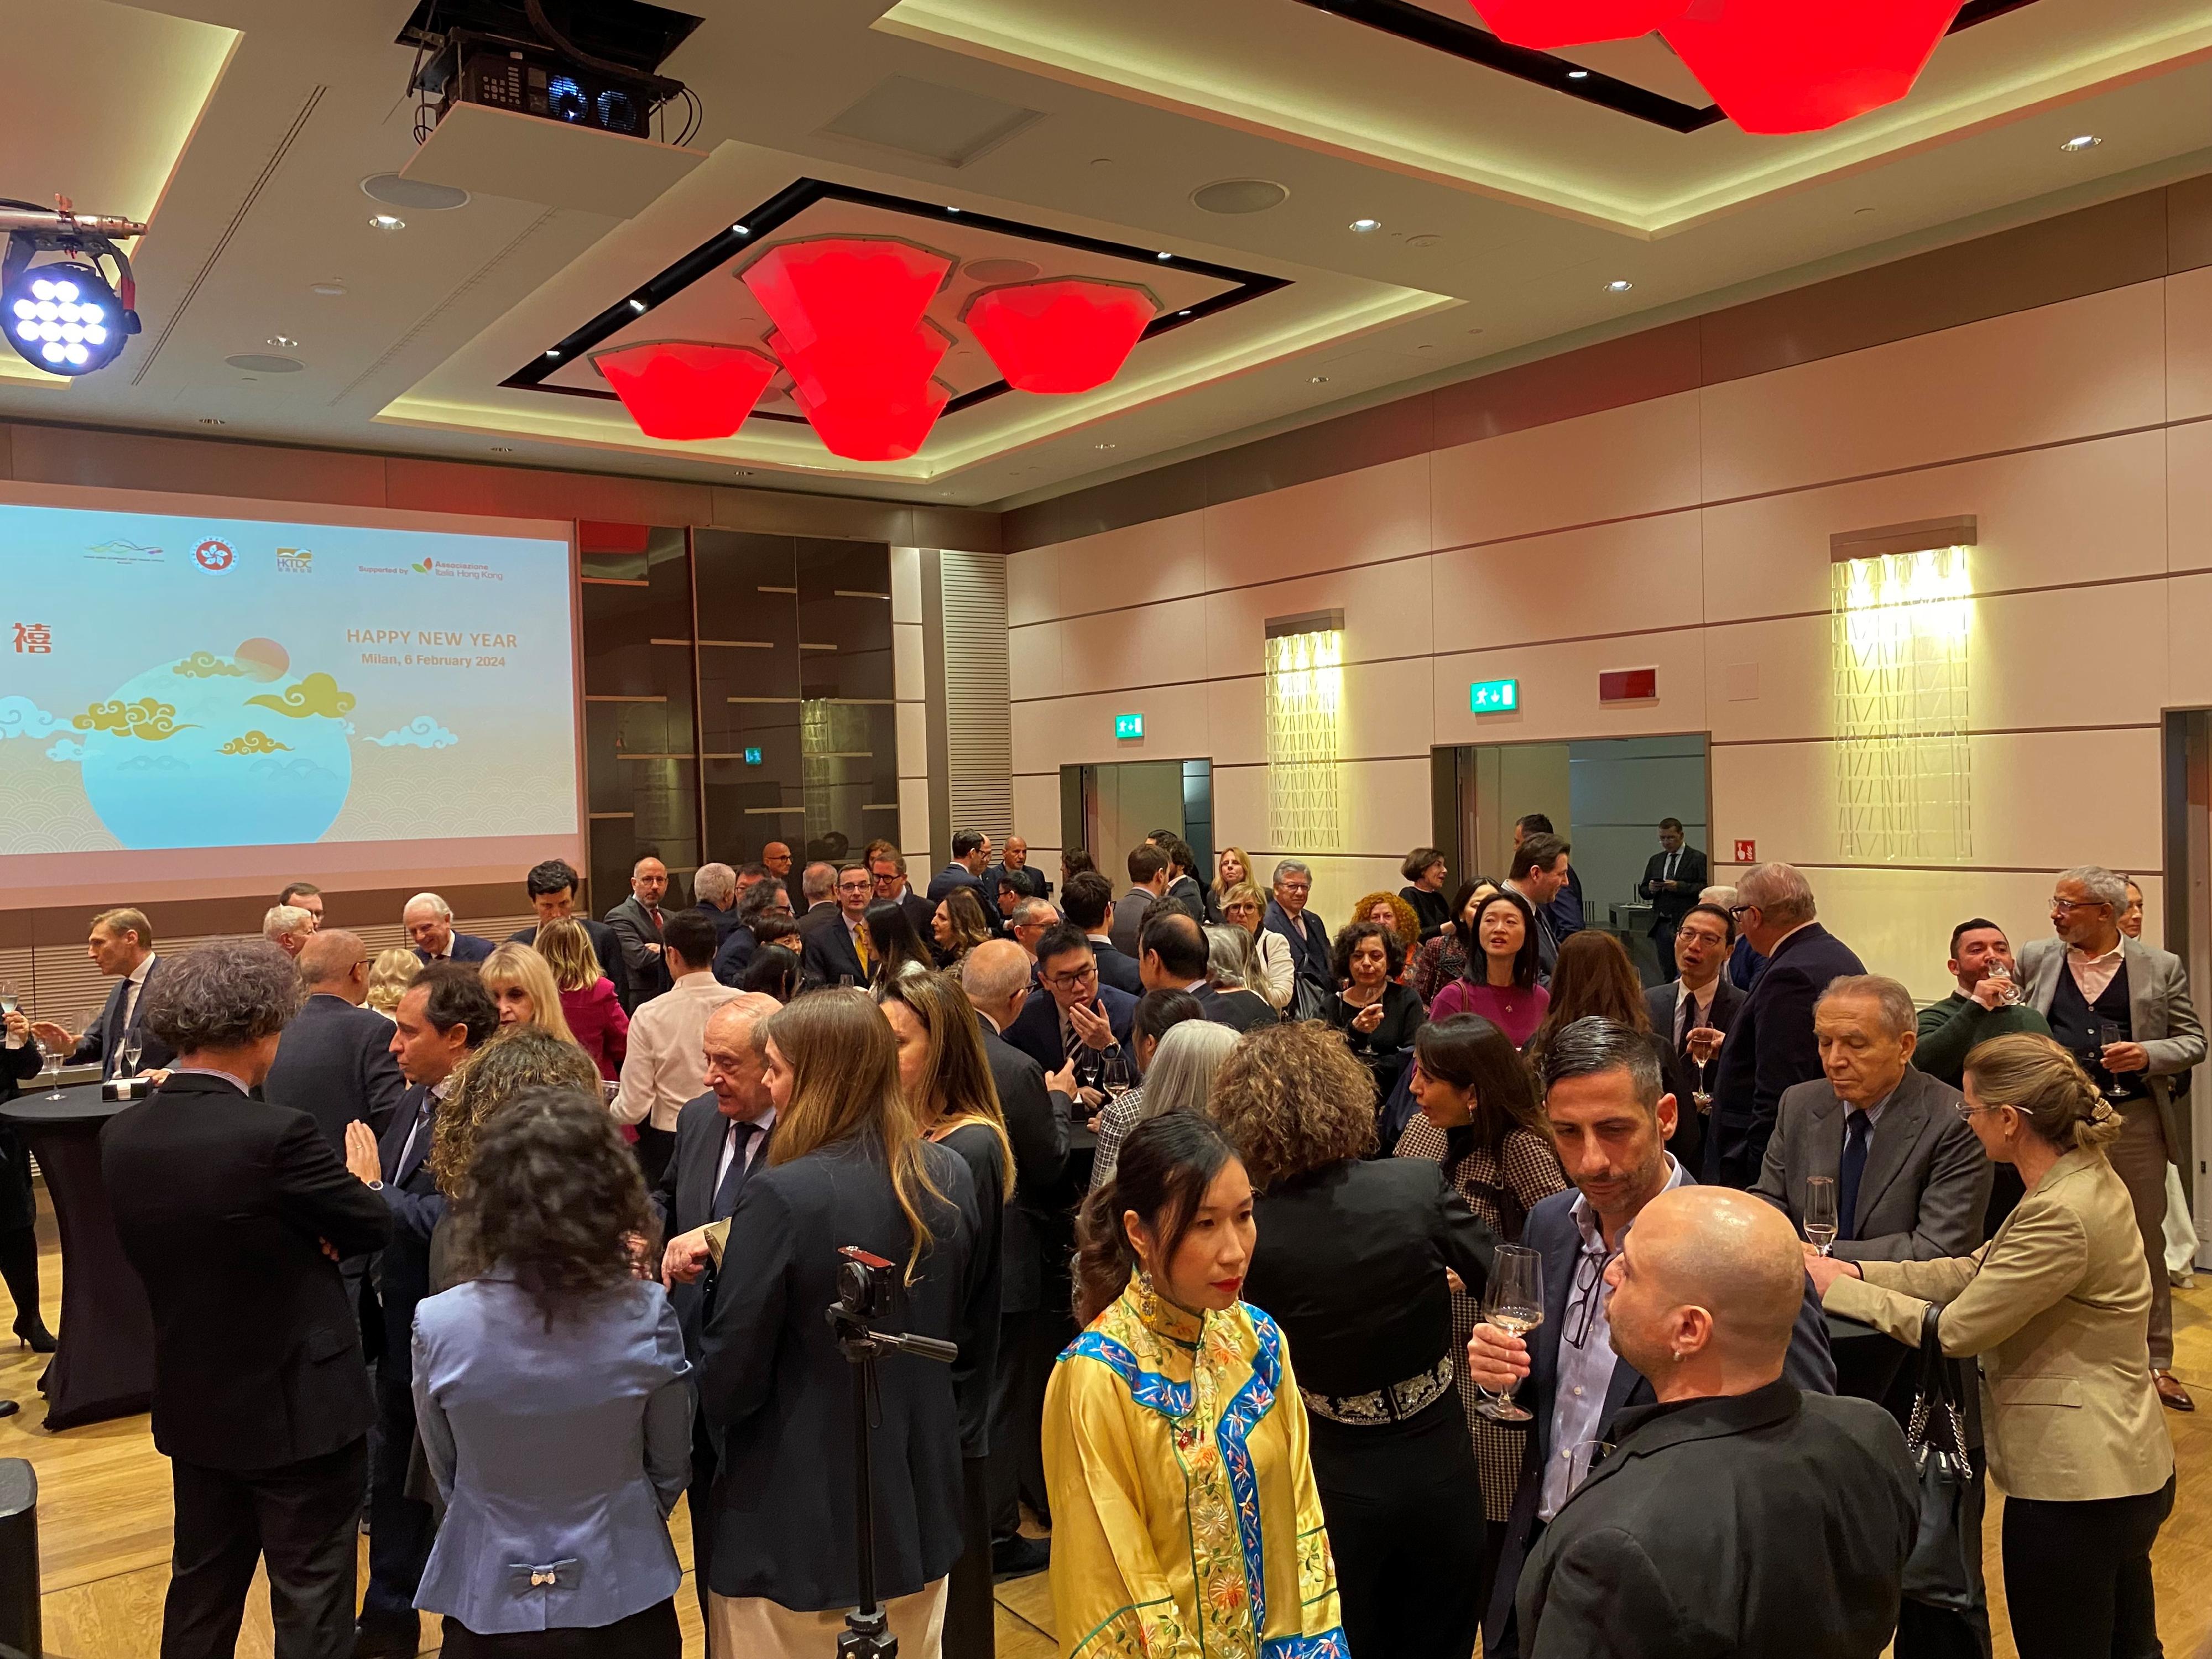 About 140 guests including officials and businesses attended the Chinese New Year reception held in Milan, Italy on February 6 (Milan time).